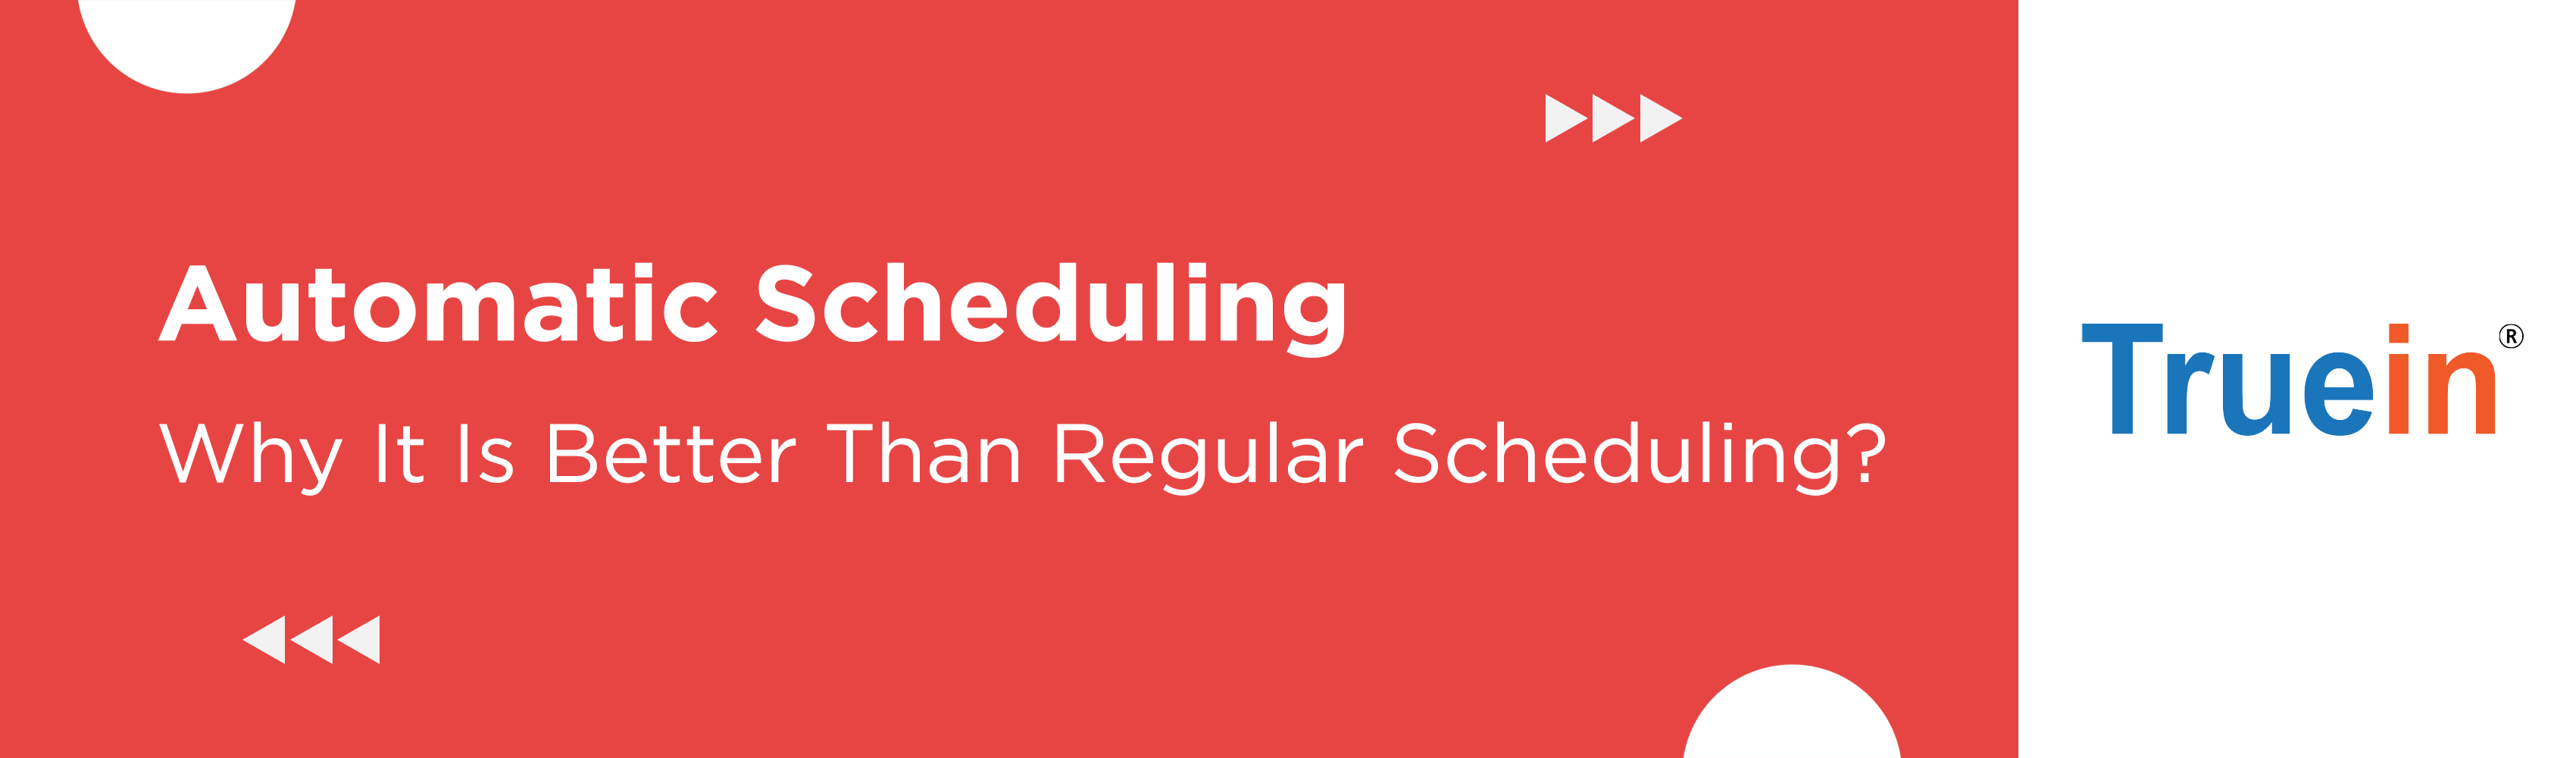 Why Automatic Scheduling Is Better Than Regular Scheduling?